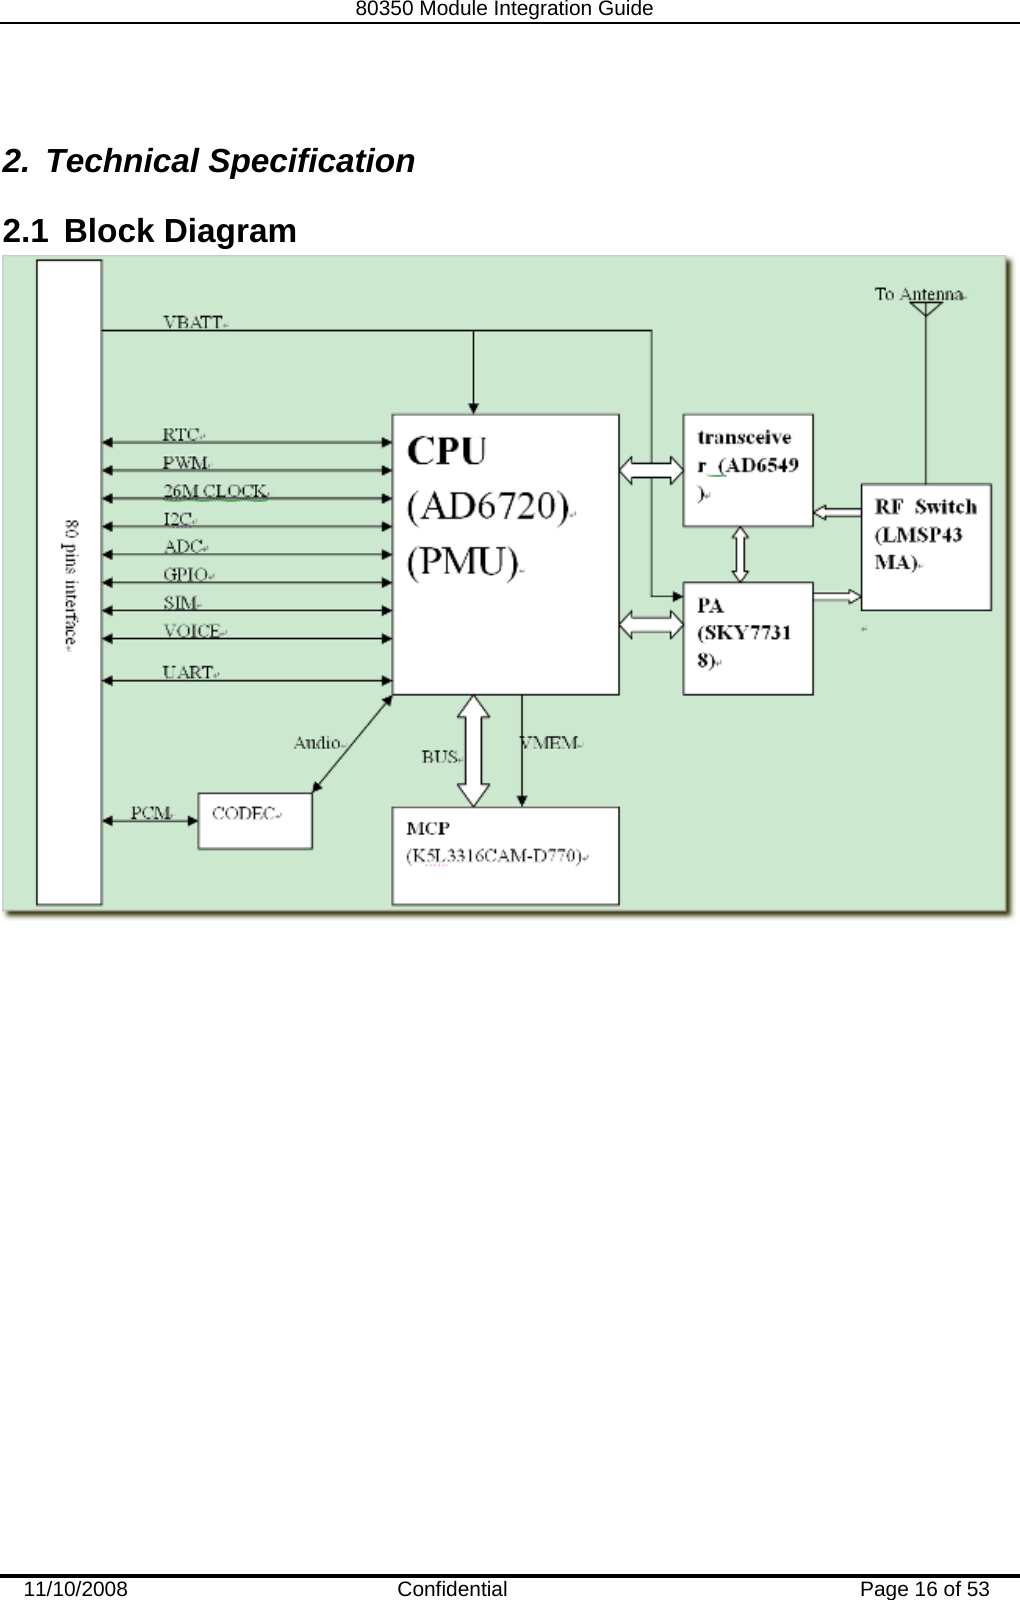   80350 Module Integration Guide  11/10/2008    Confidential  Page 16 of 53  2.  Technical Specification  2.1 Block Diagram  